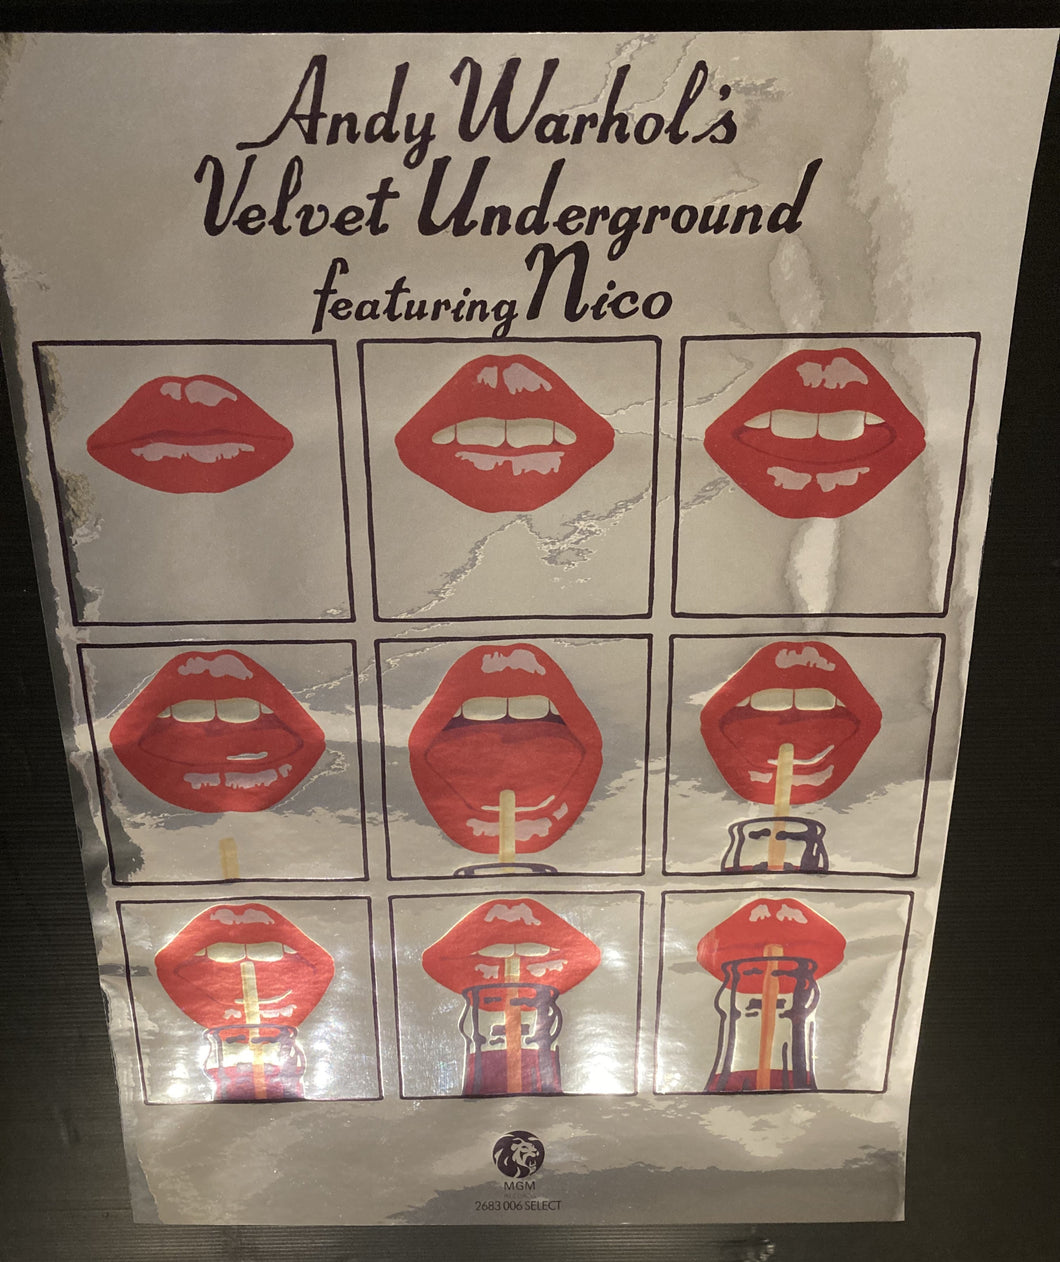 Velvet Underground chrome/mirror effect poster - Andy Warhol lips design 1967 New Large A2 - Original Music and Movie Posters for sale from Bamalama - Online Poster Store UK London